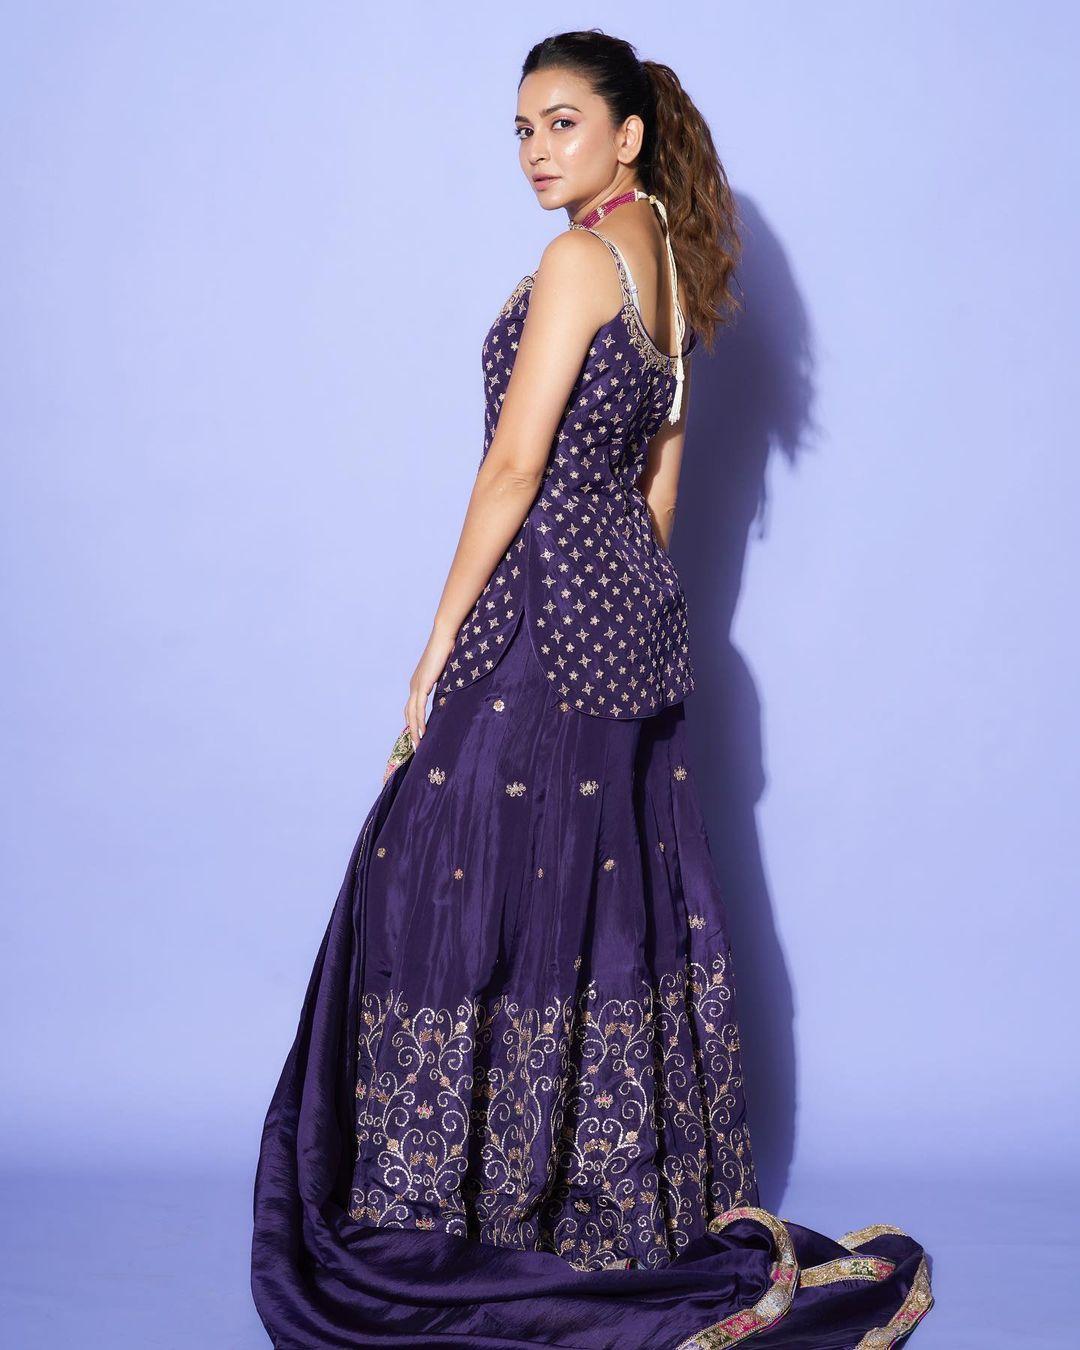 Lehengas are often our best friends at weddings, but many times we are left confused because we can't find the best inspiration. In this look, Kriti opted for a purple lehenga set